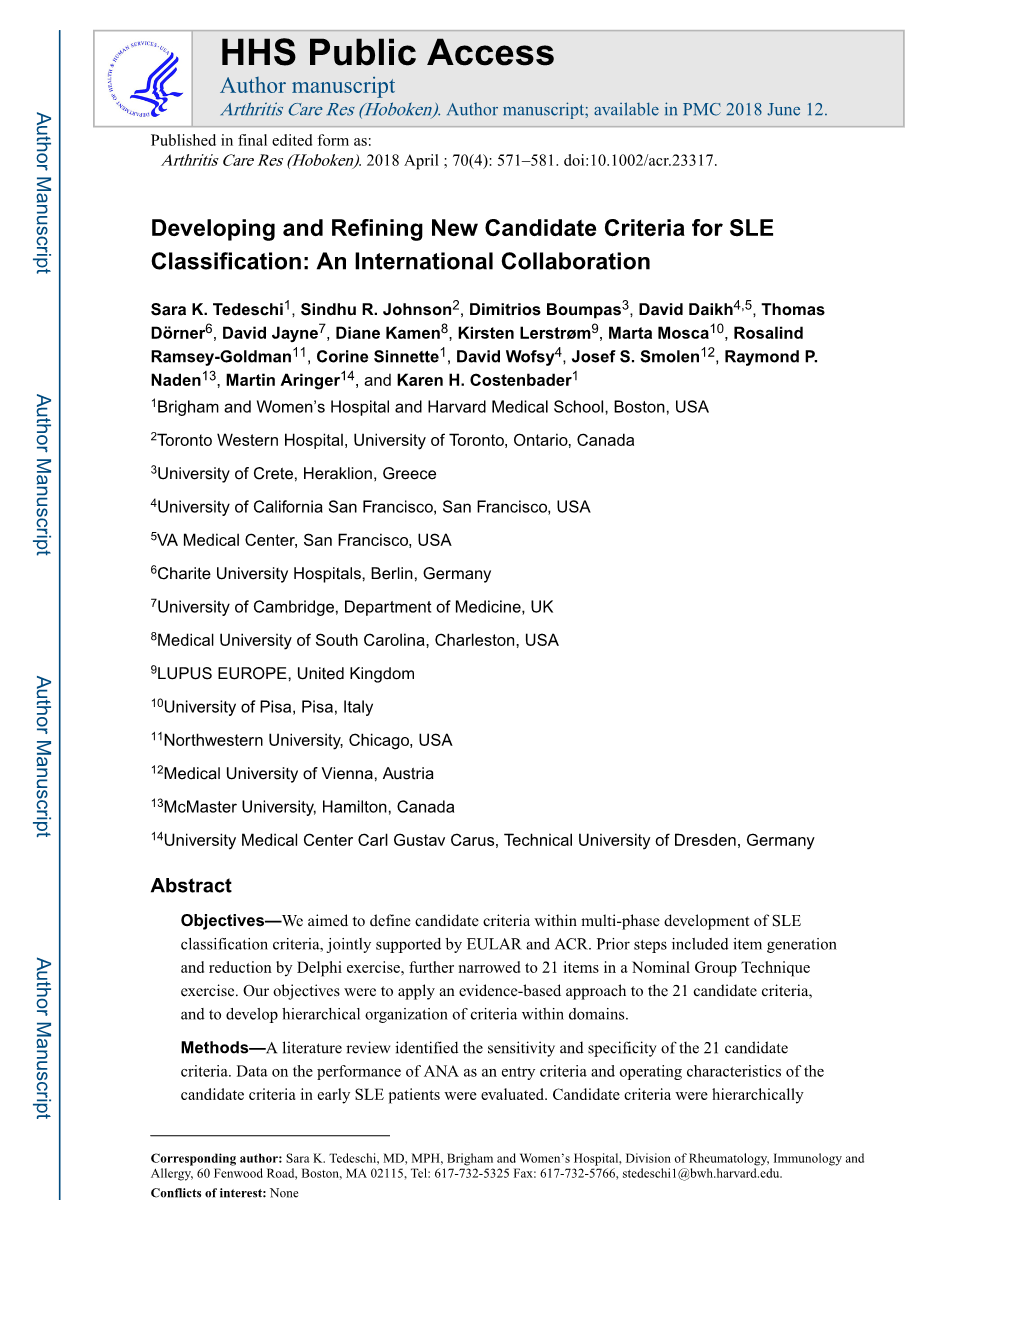 Developing and Refining New Candidate Criteria for SLE Classification: an International Collaboration